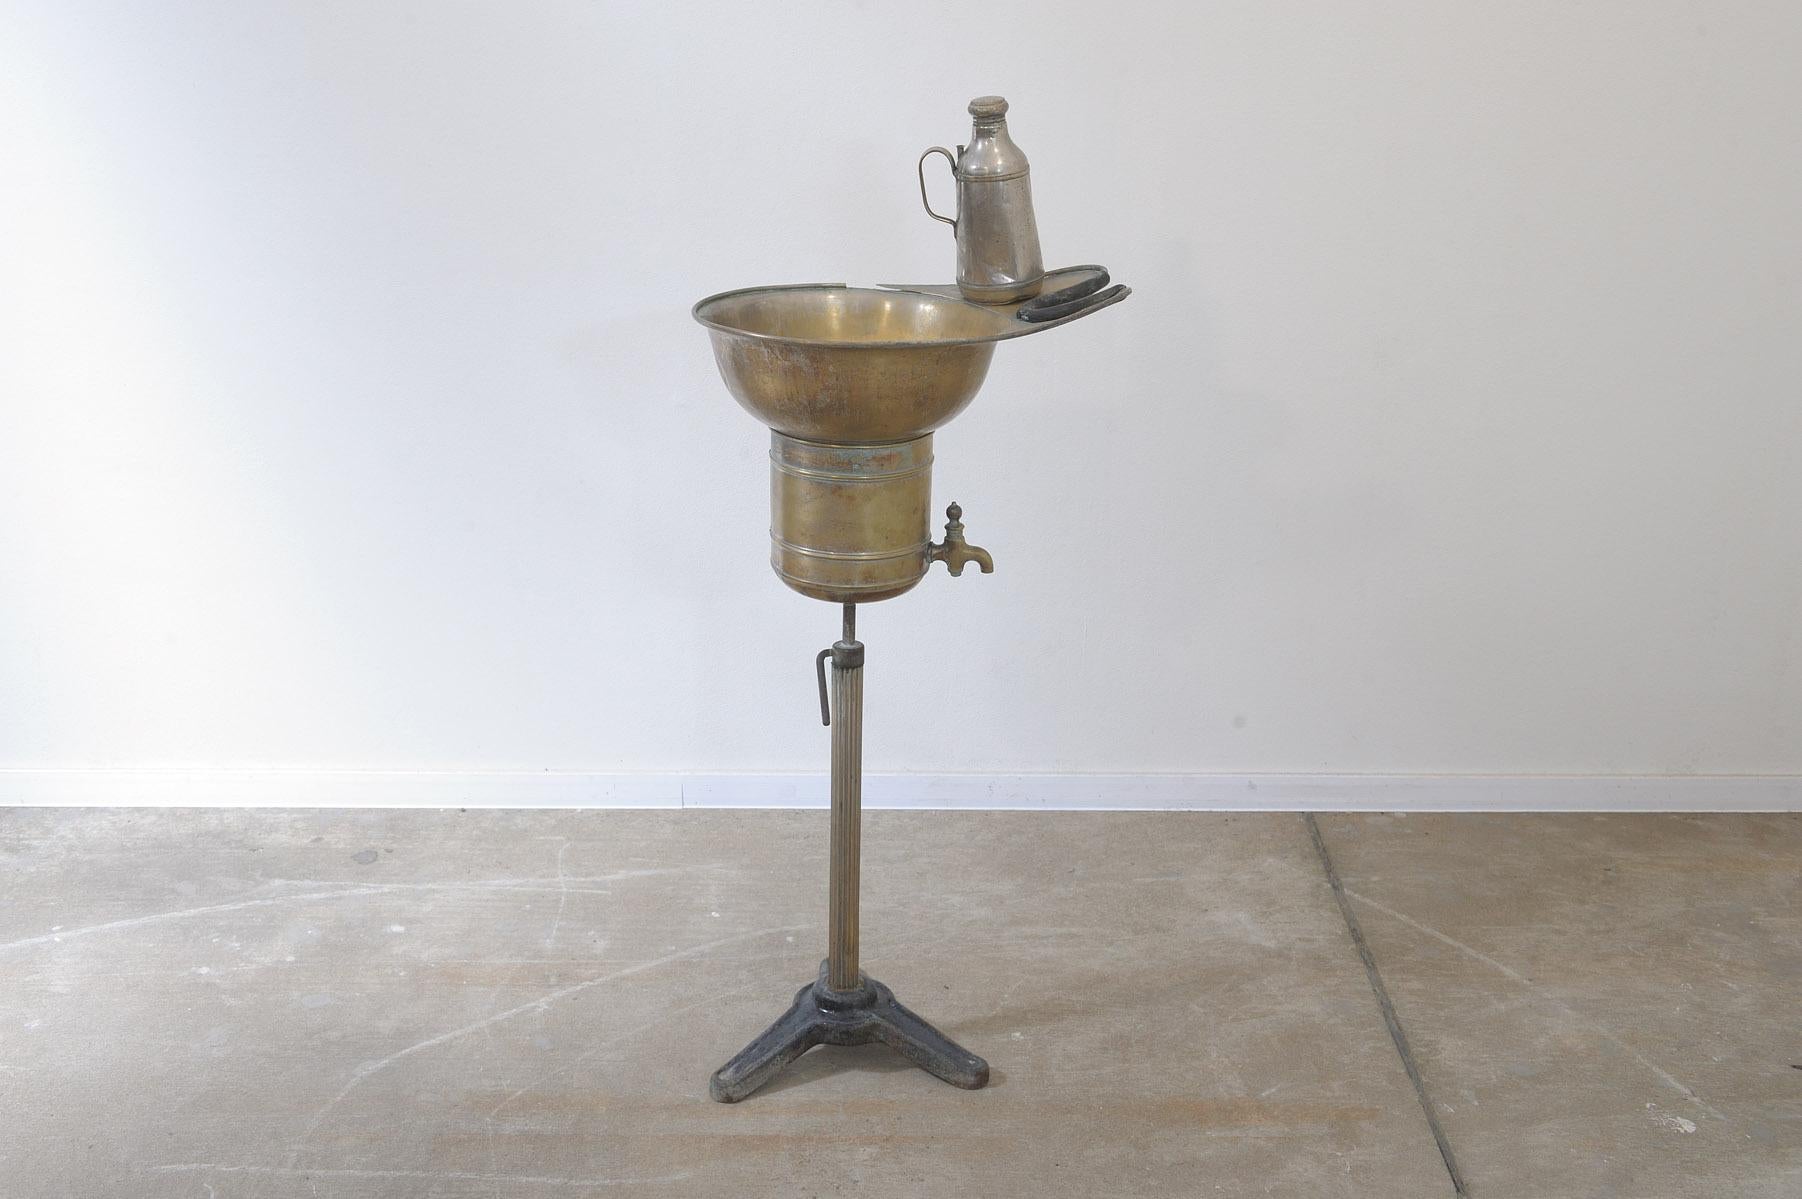 A hairdressing wash basin from the beginning of the 20th century.
It was used to wash the head in a hairdresser’s salon.
Material metal, silver-plated or chrome-plated.
It bears signs of age and use, slightly damaged in a few places.
However, the